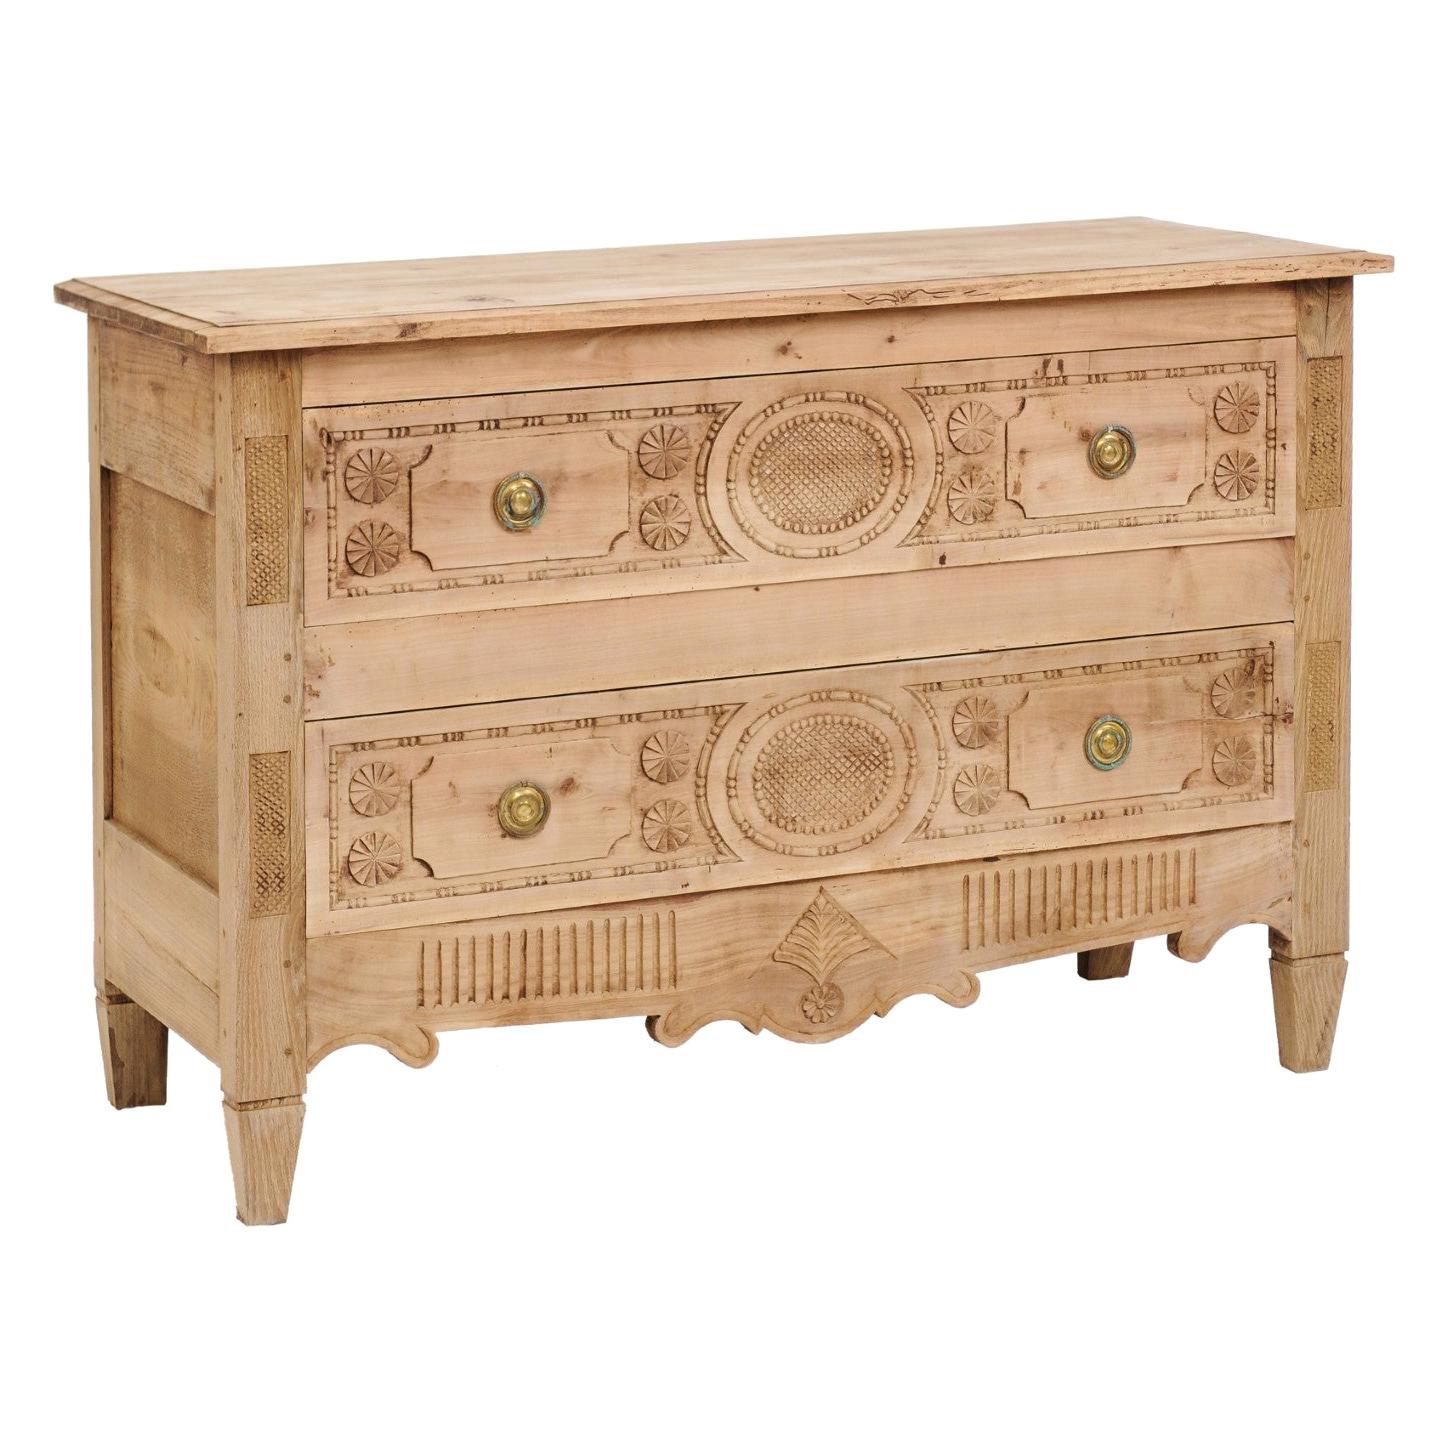 Northern French Louis XVI Style 1900s Stripped Oak Commode with Two Drawers